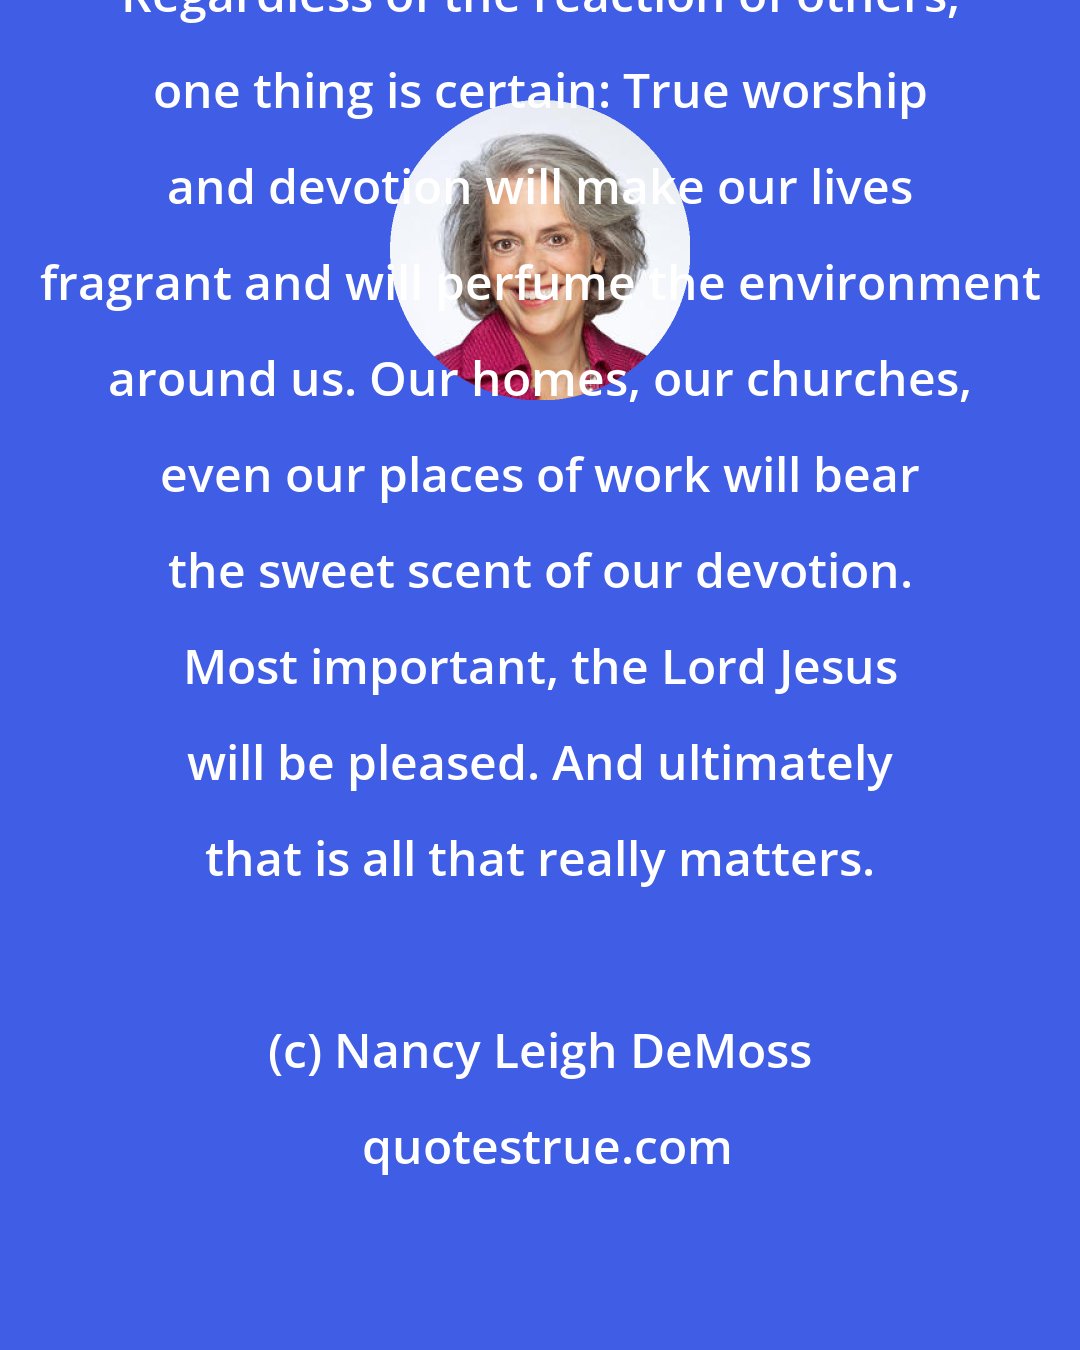 Nancy Leigh DeMoss: Regardless of the reaction of others, one thing is certain: True worship and devotion will make our lives fragrant and will perfume the environment around us. Our homes, our churches, even our places of work will bear the sweet scent of our devotion. Most important, the Lord Jesus will be pleased. And ultimately that is all that really matters.